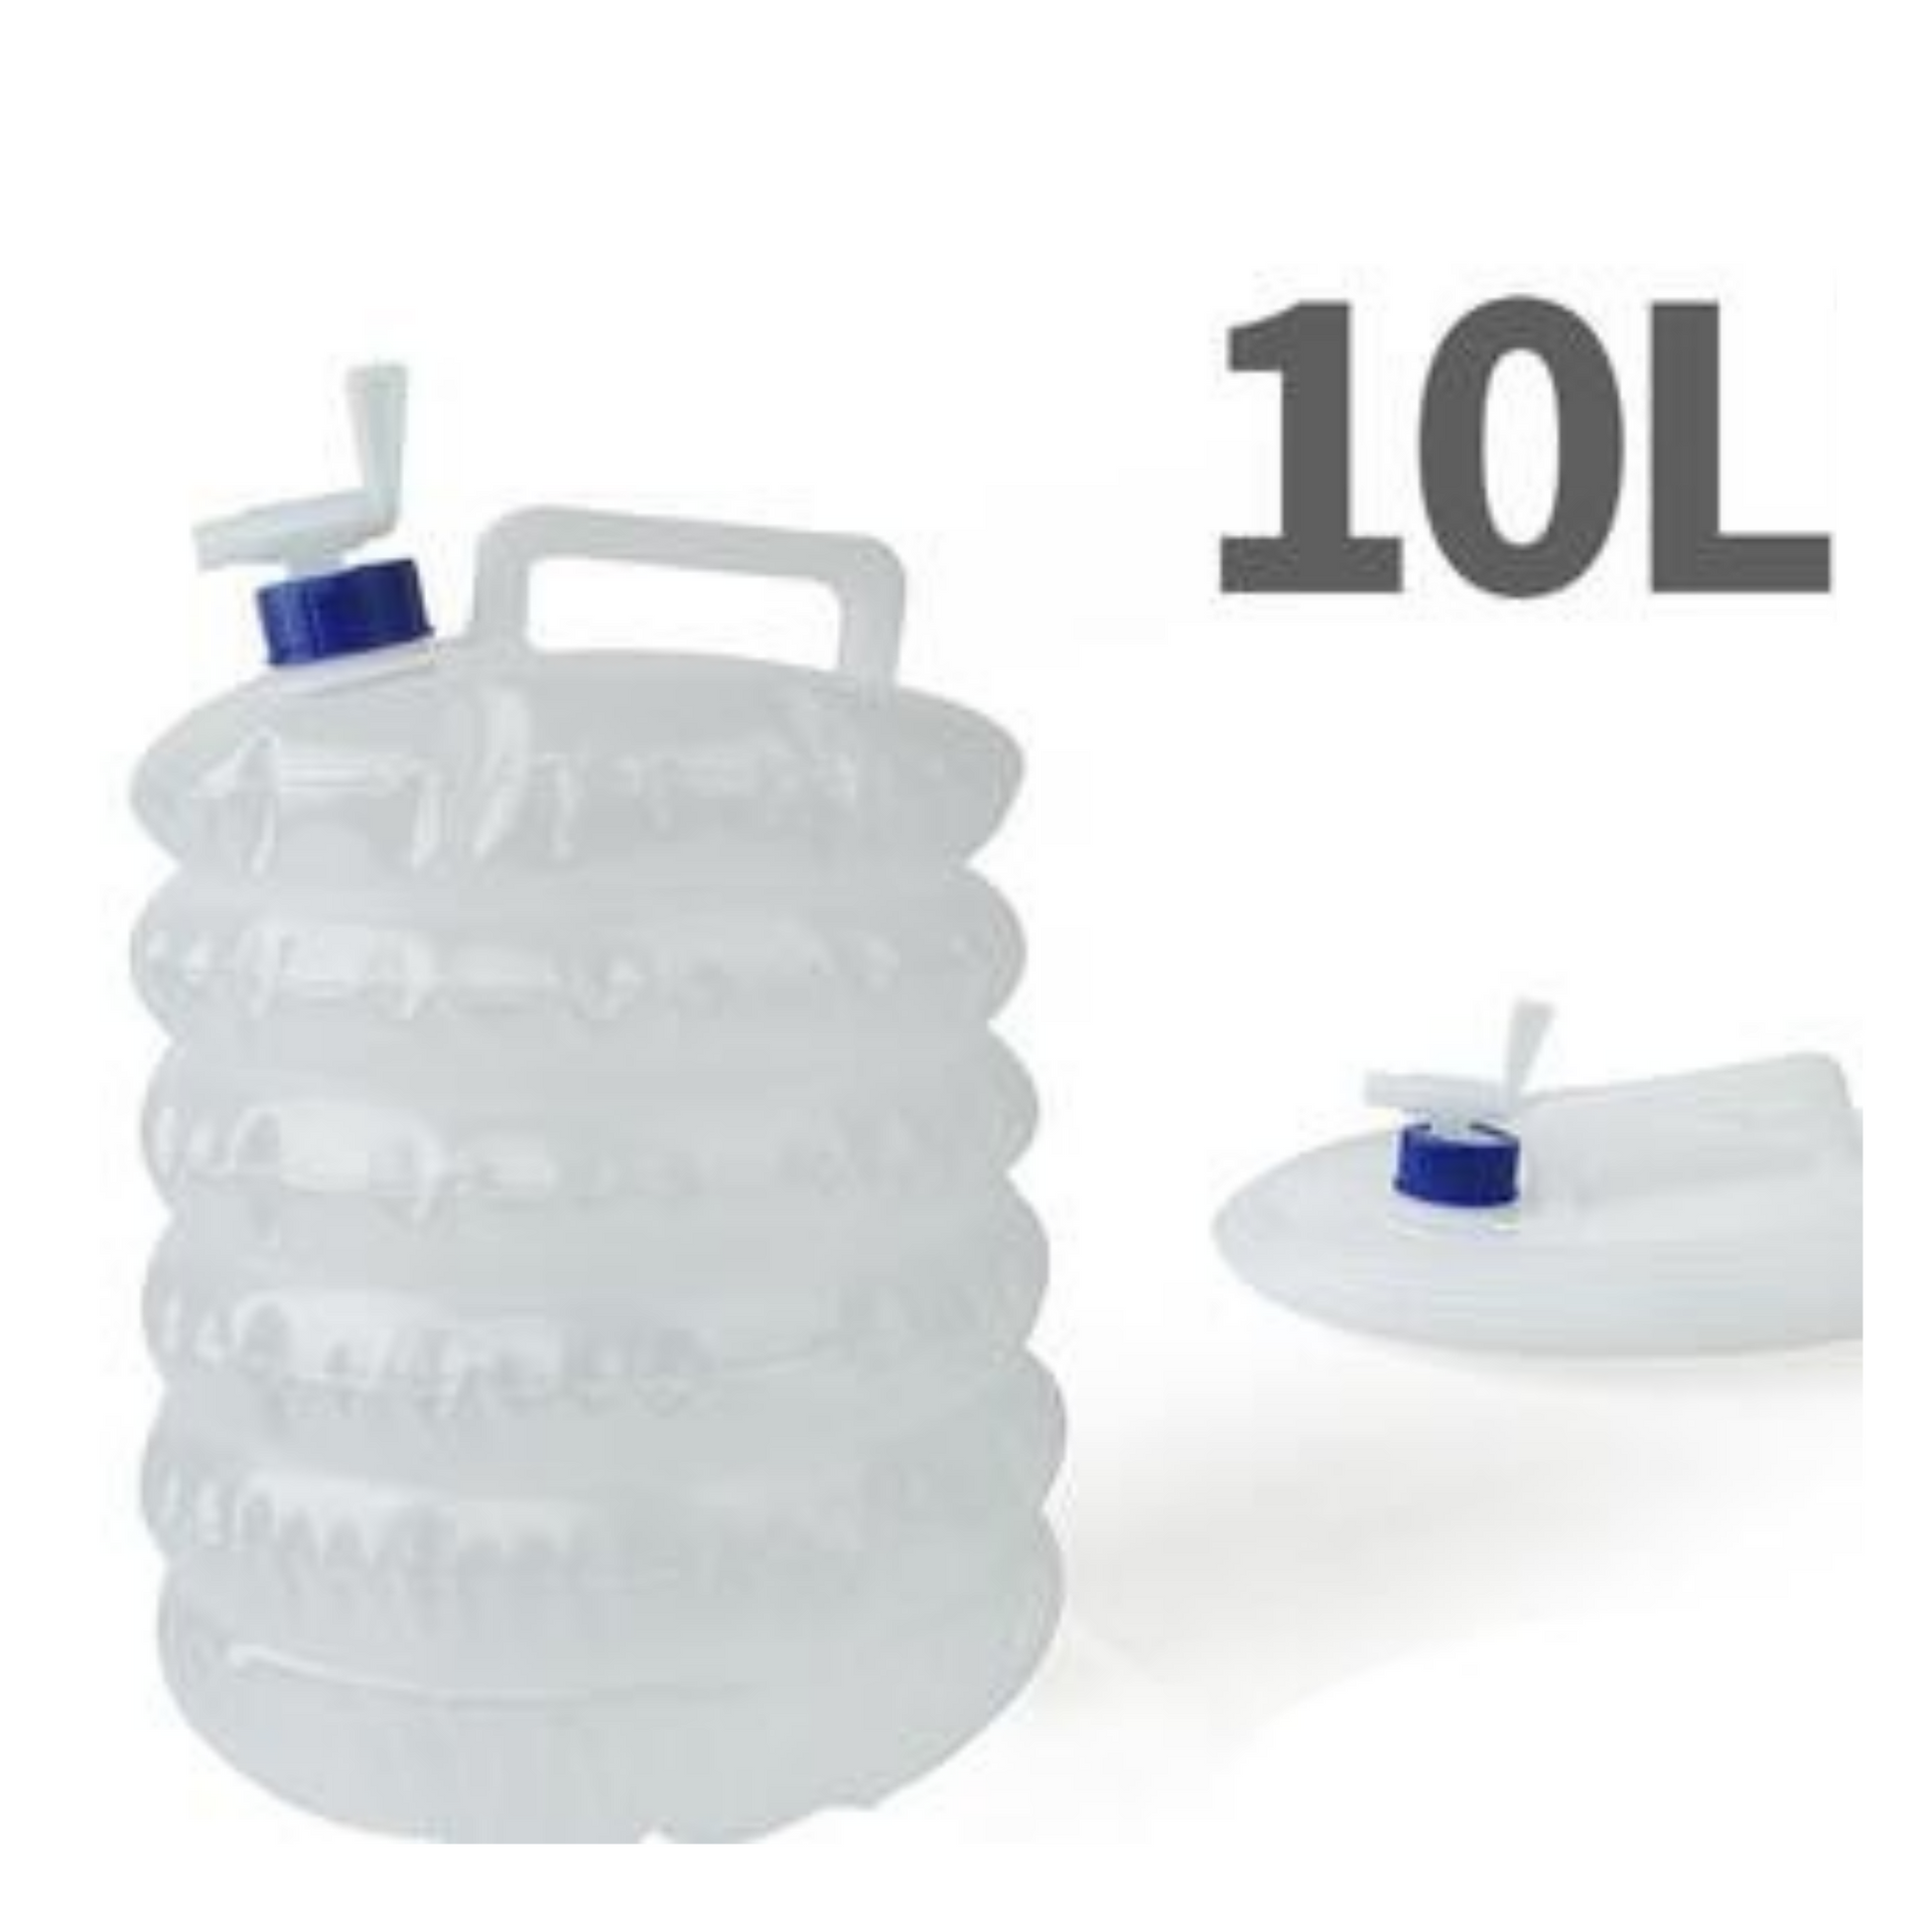 10L container with adjustable spigot and ergonomic handle